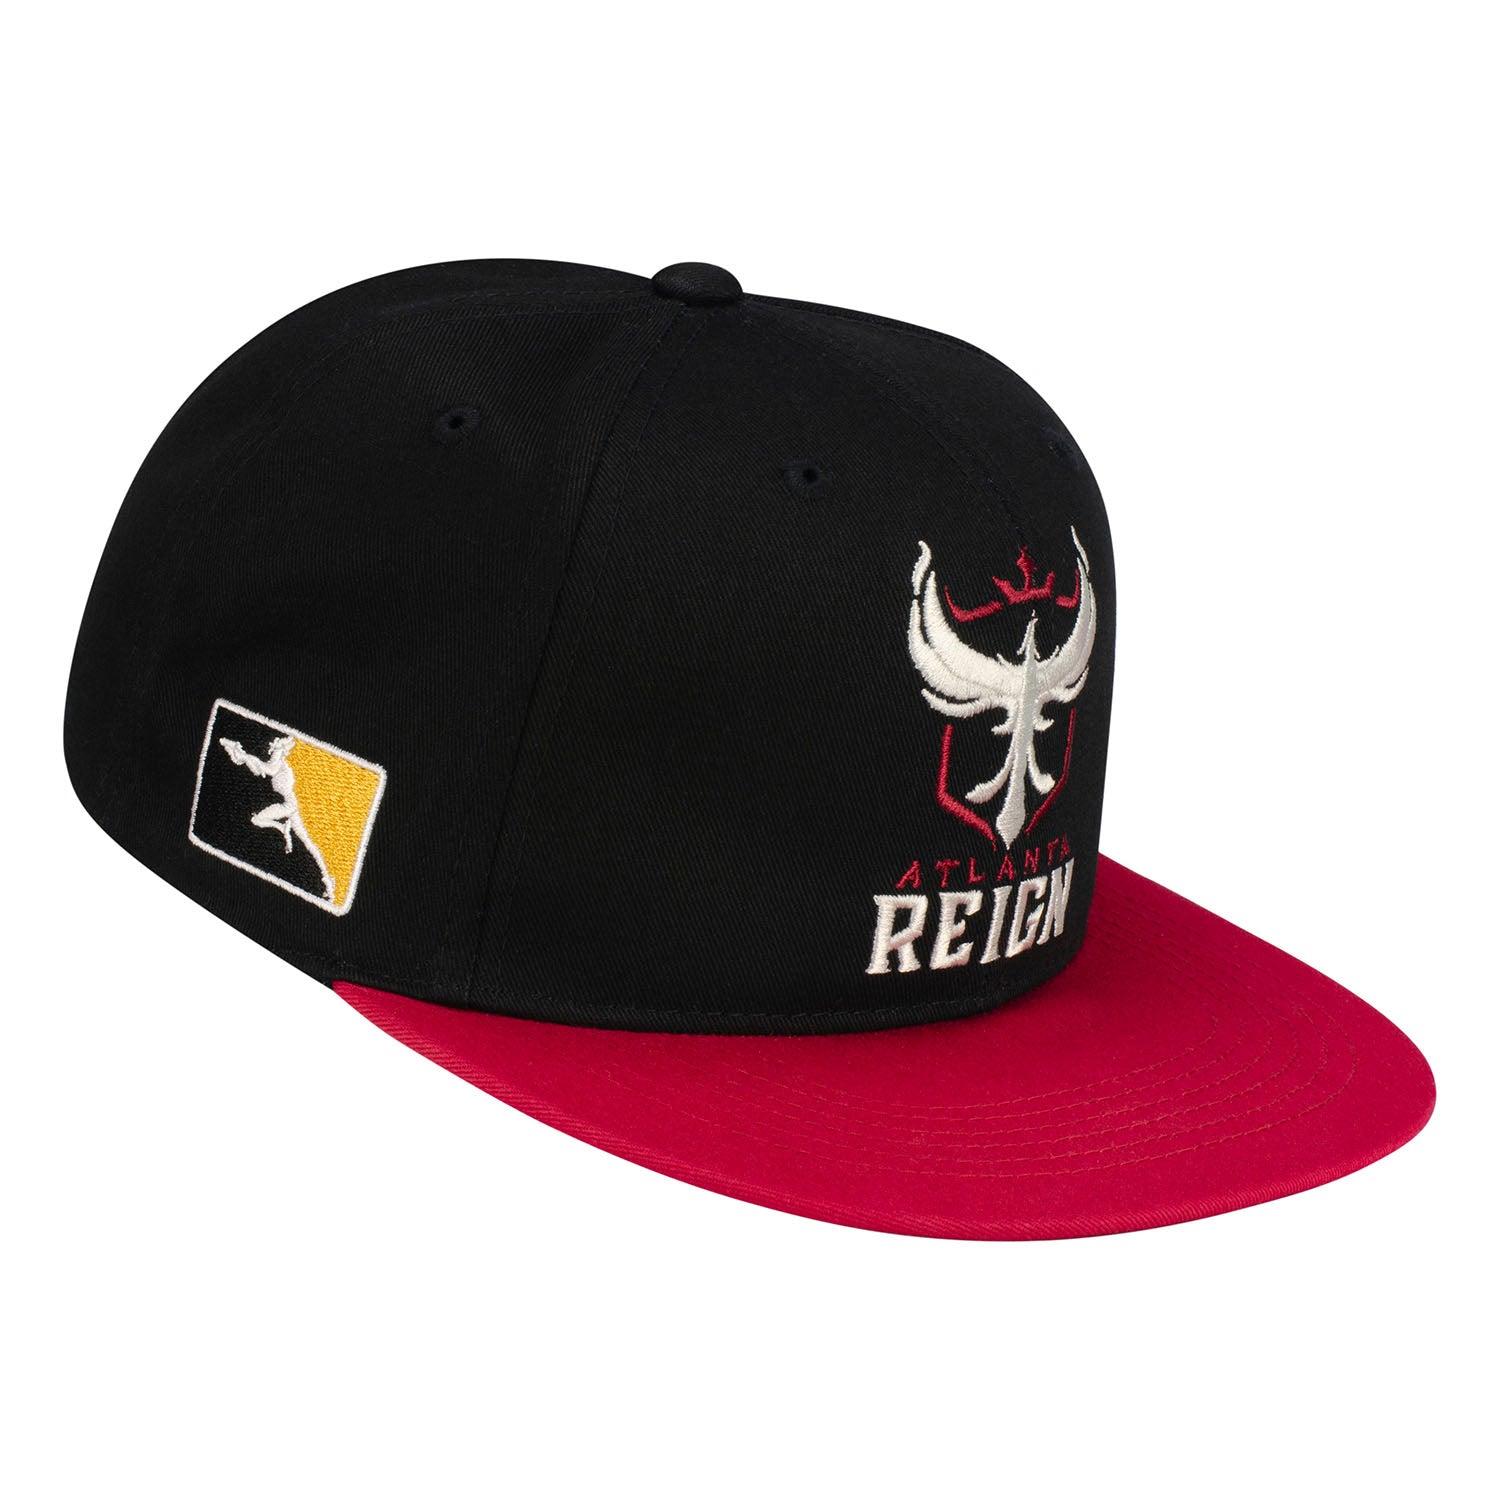 Atlanta Reign Red Snapback Hat - Right View